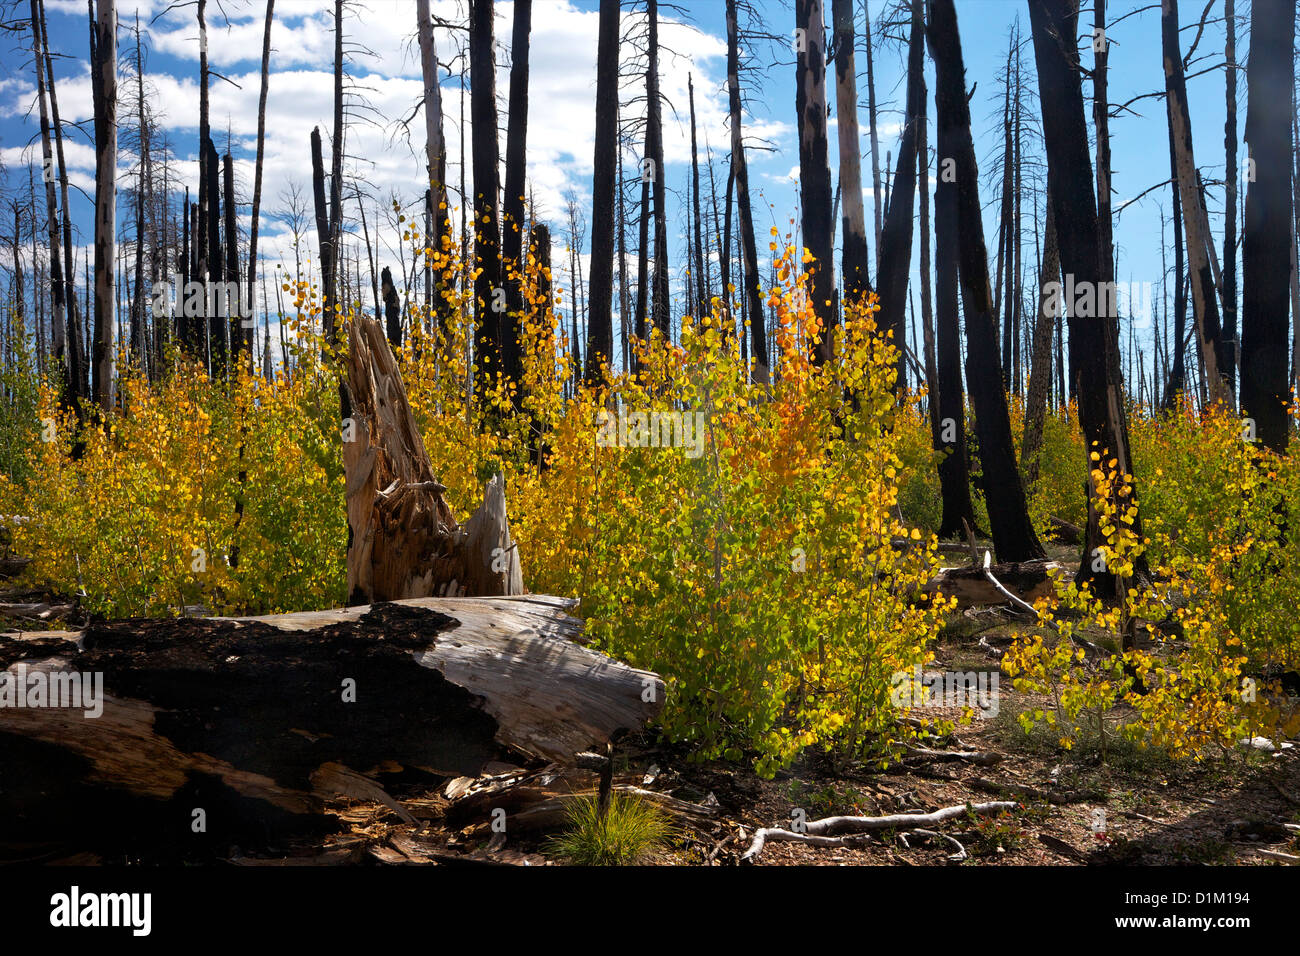 Young Aspen trees in fall, with fire-damaged Lodgepole Pines, Kaibab National Forest, Grand Canyon National Park, Arizona, USA Stock Photo